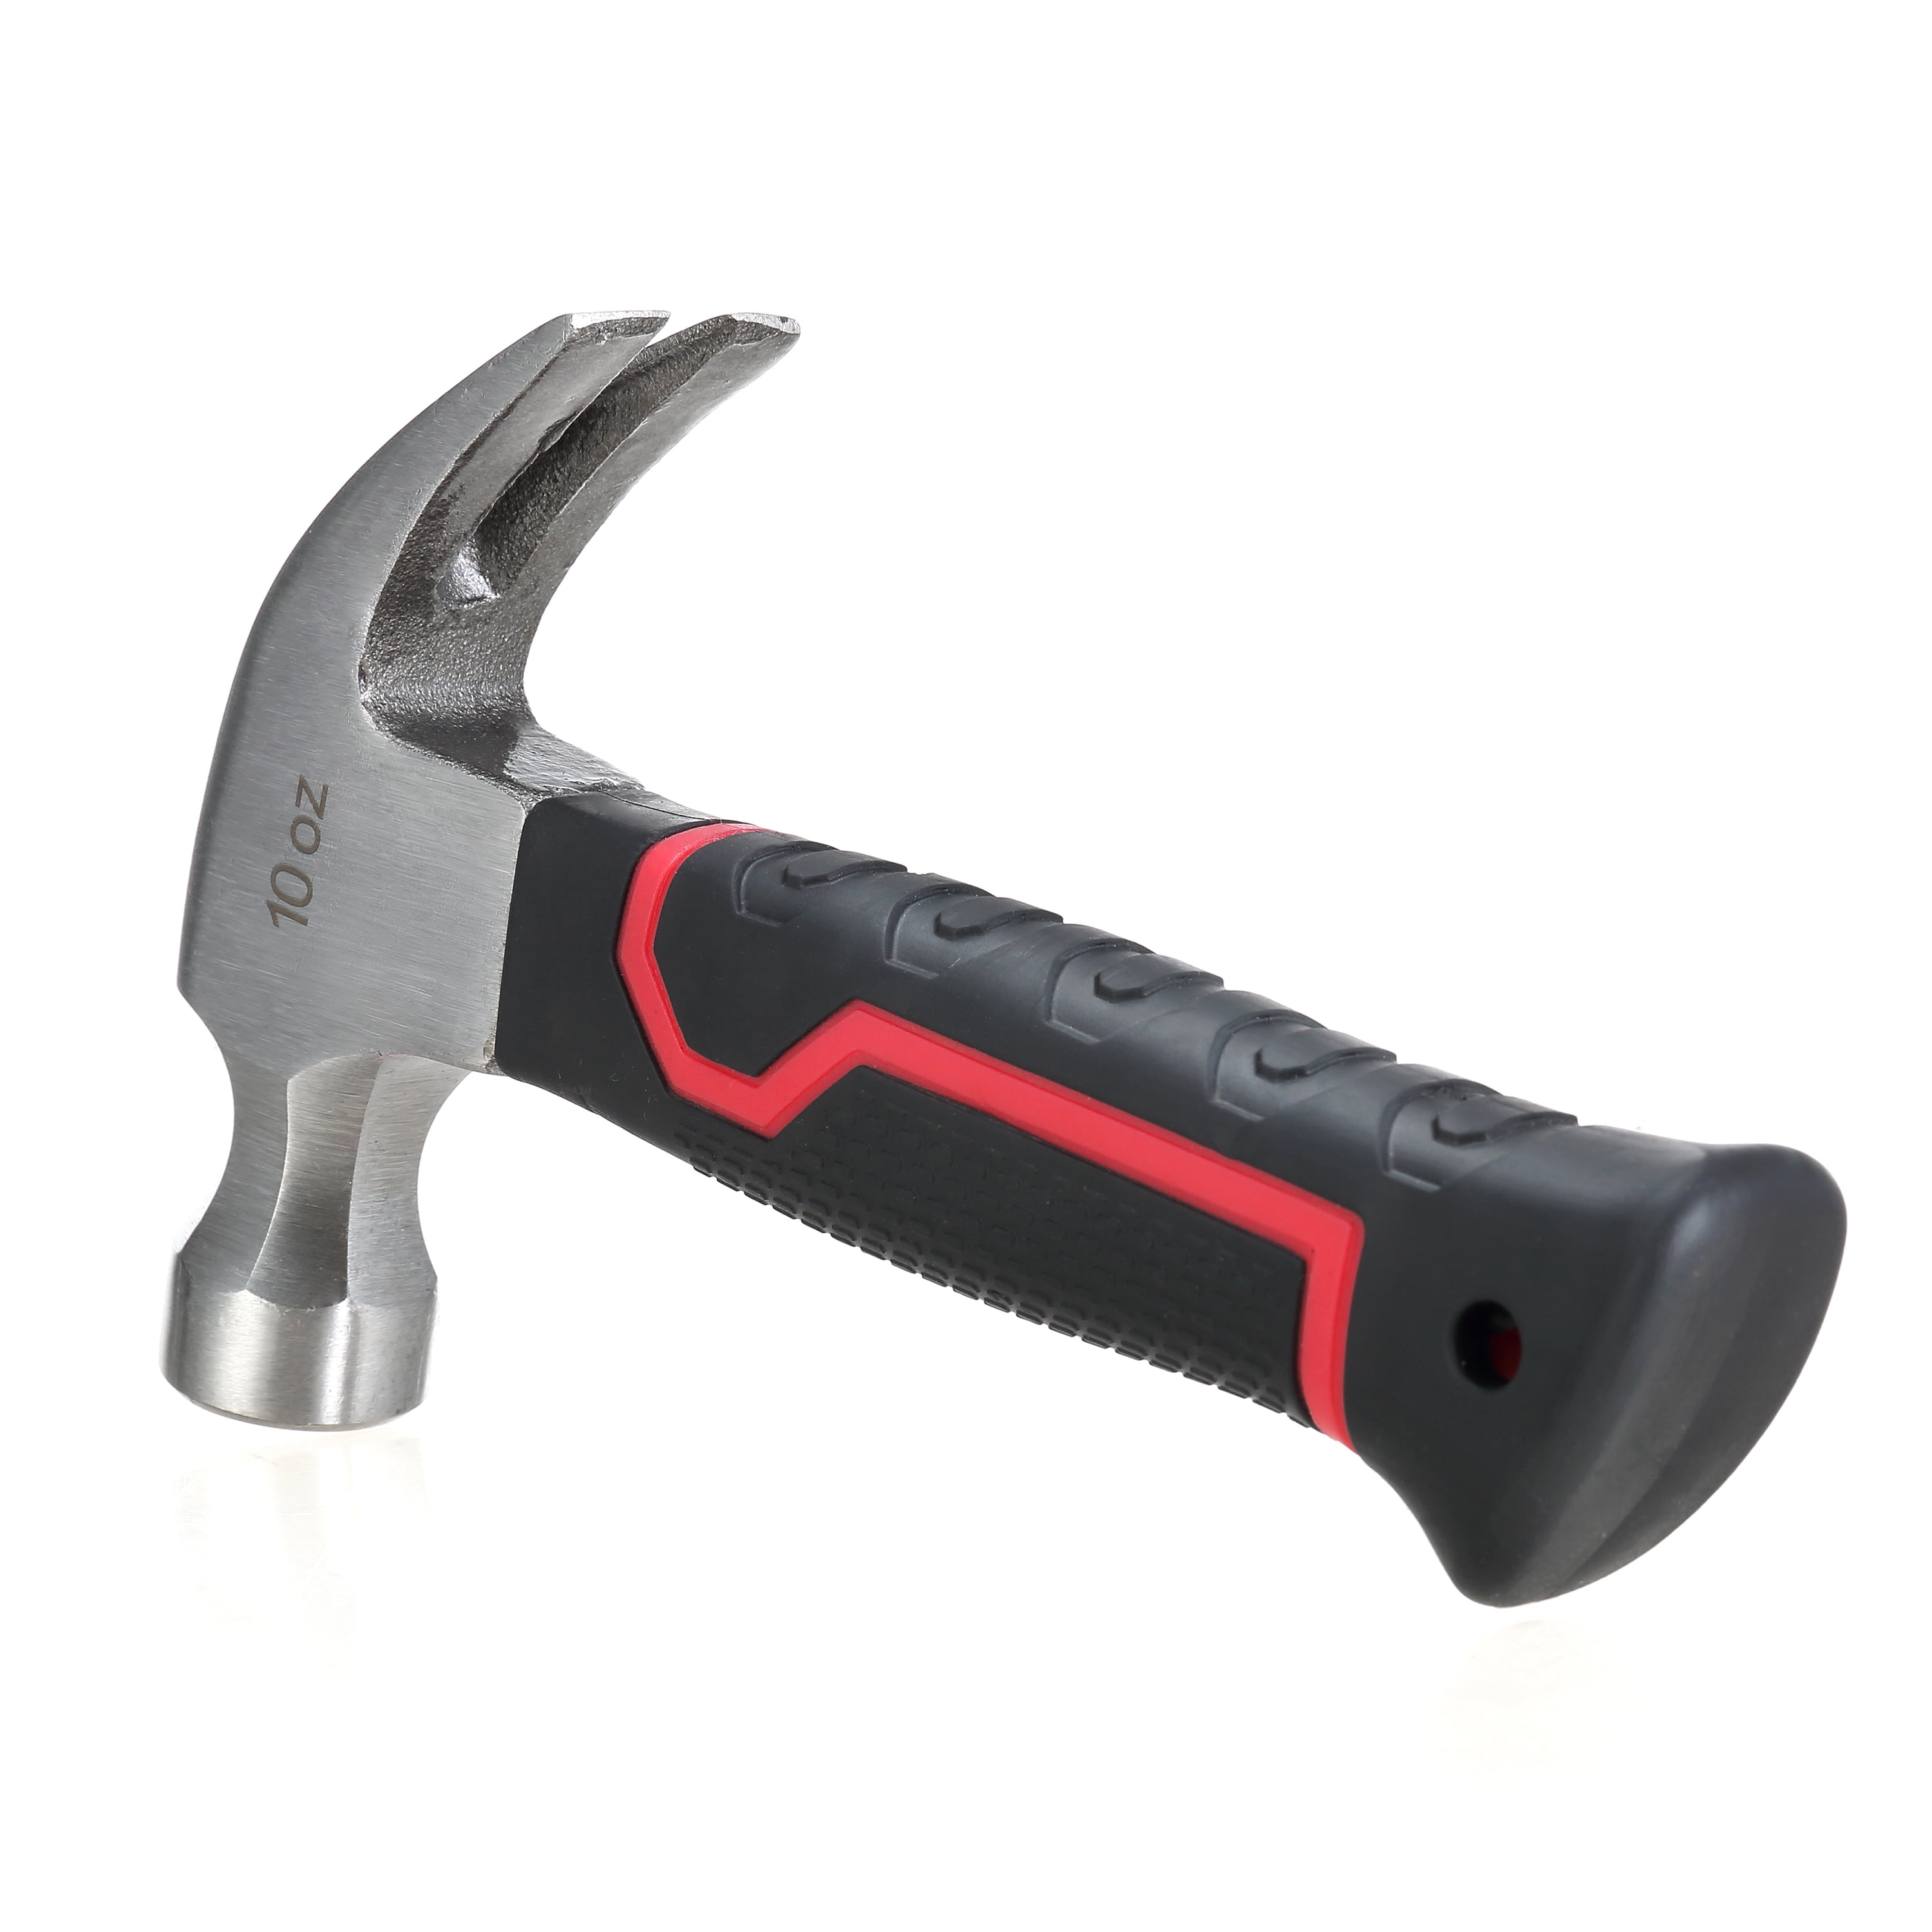 CLAW HAMMER 10OZ STUBBY Hammers Tools 